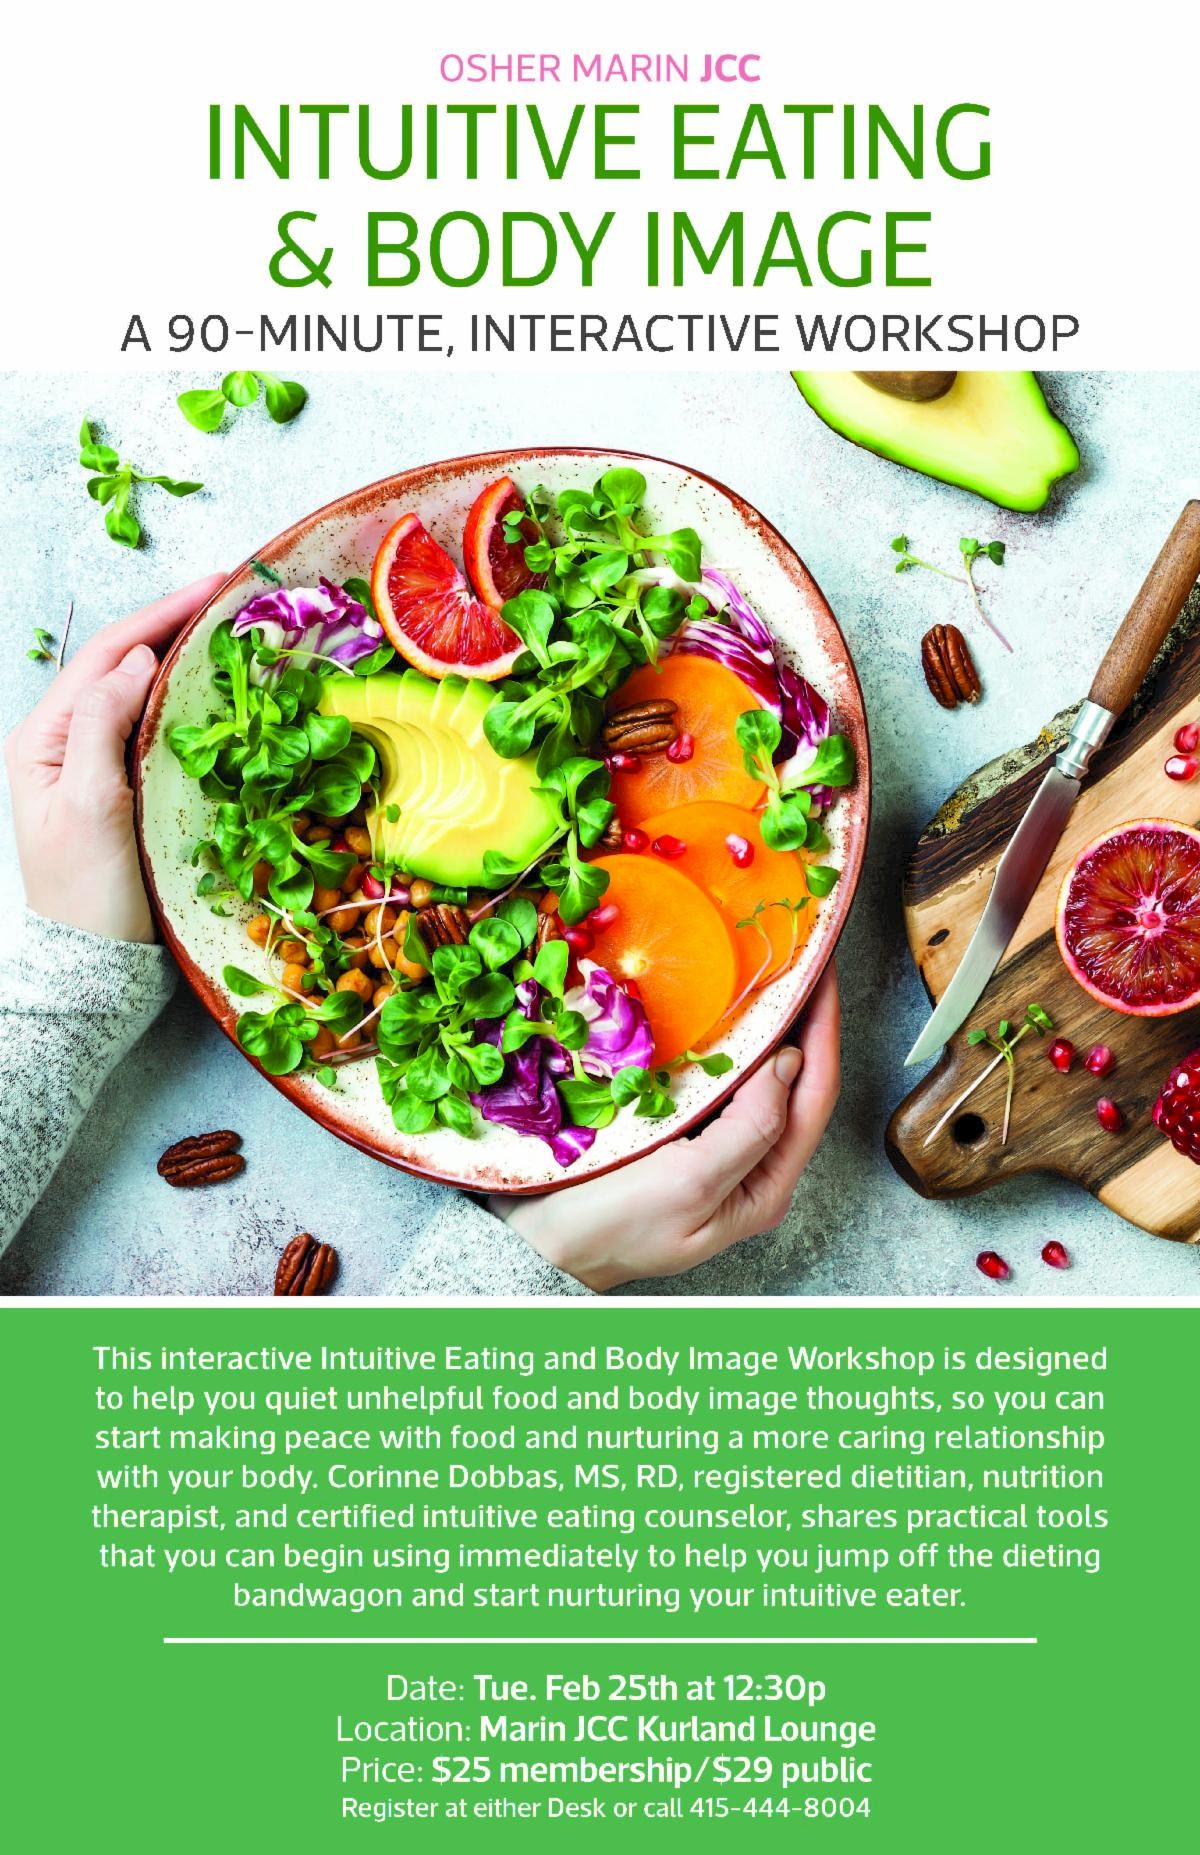 Intuitive Eating and Body Image Workshop at Osher Marin JCC February